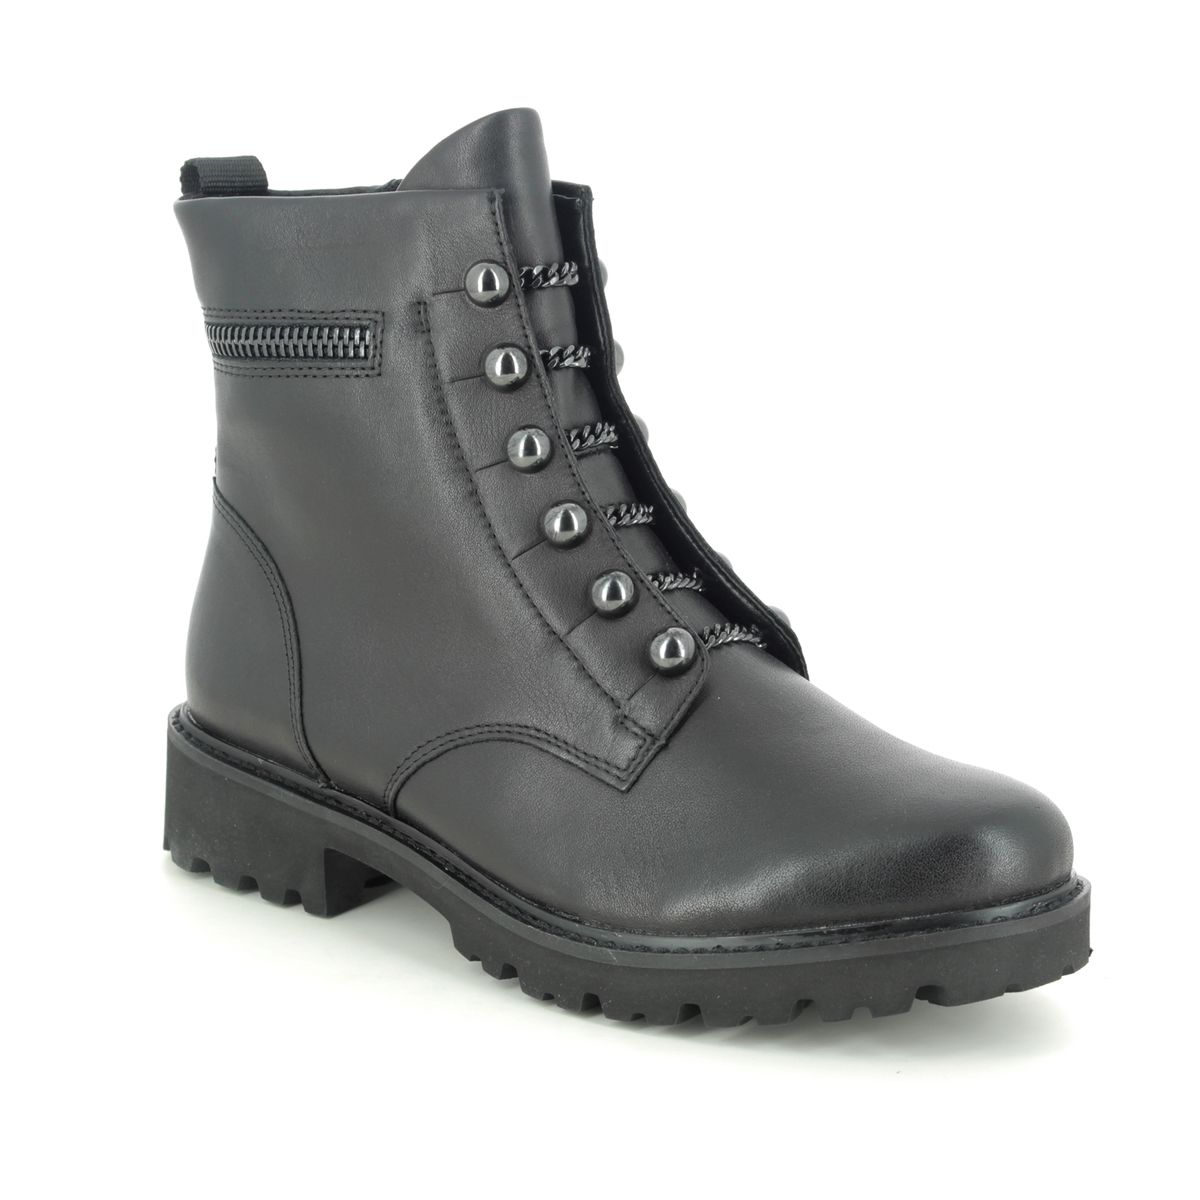 Remonte Docland Black Leather Womens Biker Boots D8670-01 In Size 40 In Plain Black Leather